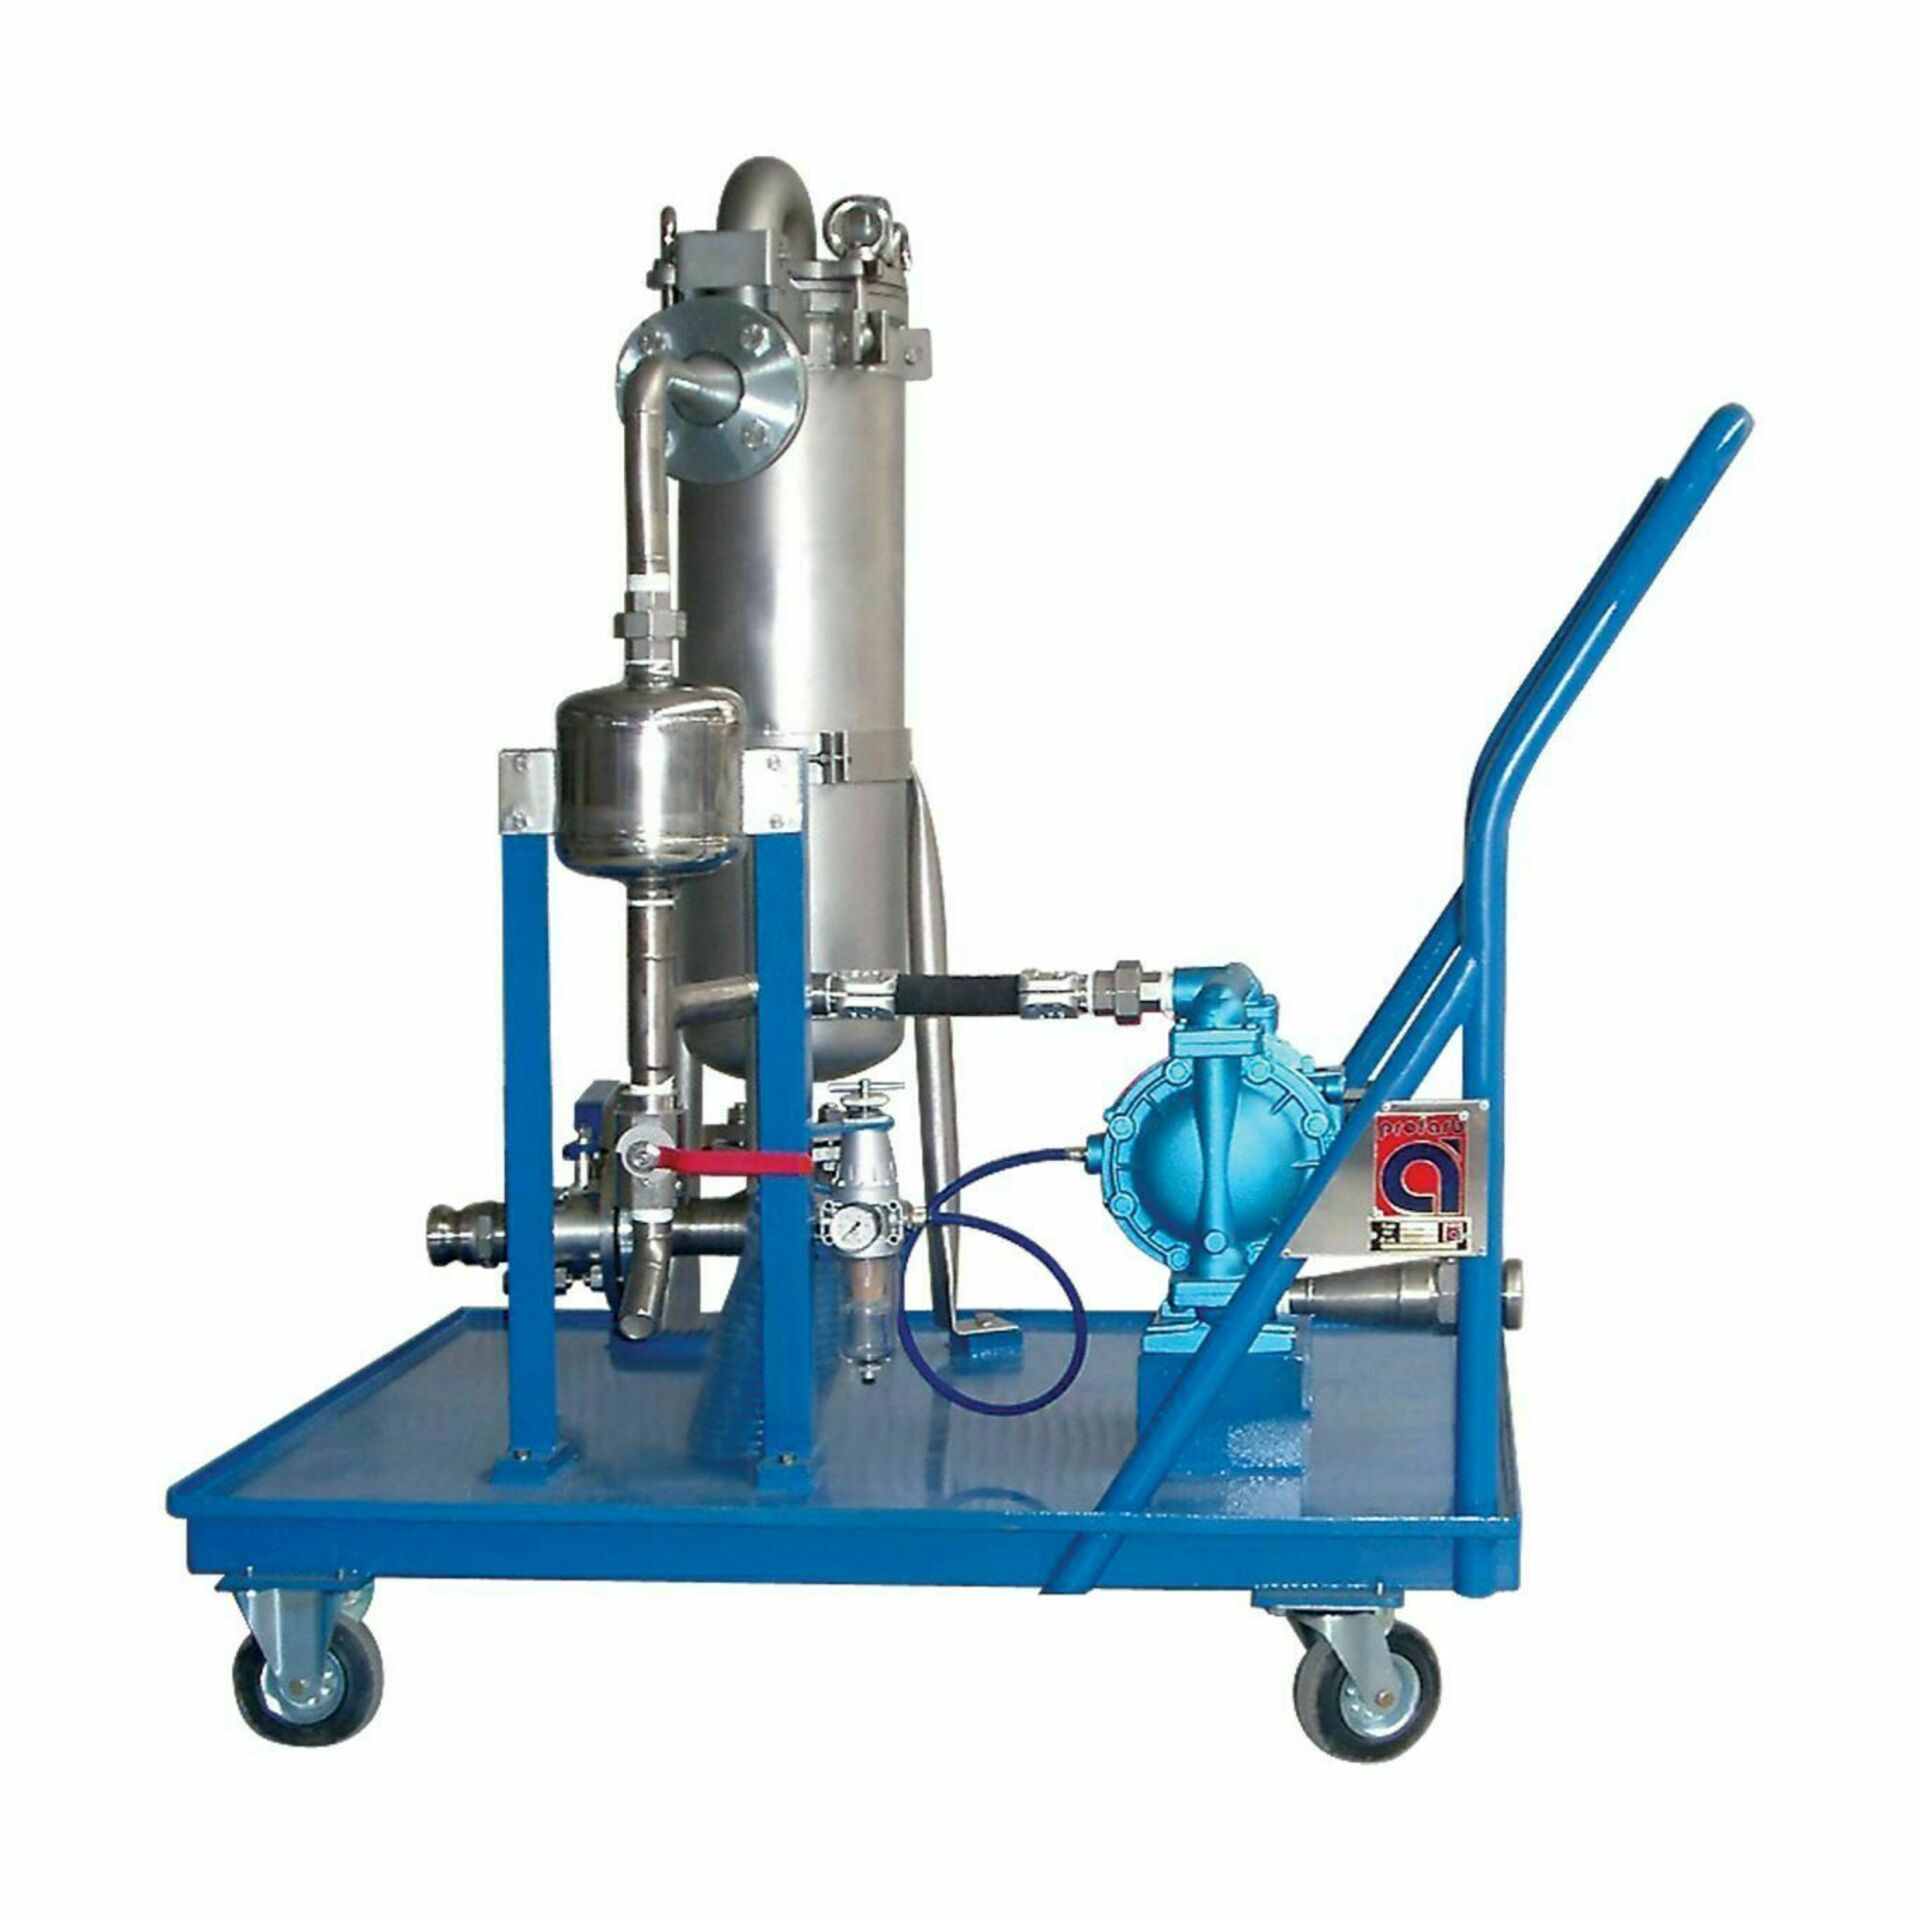 PPF/PGF pumping and filtering units / liquid filters